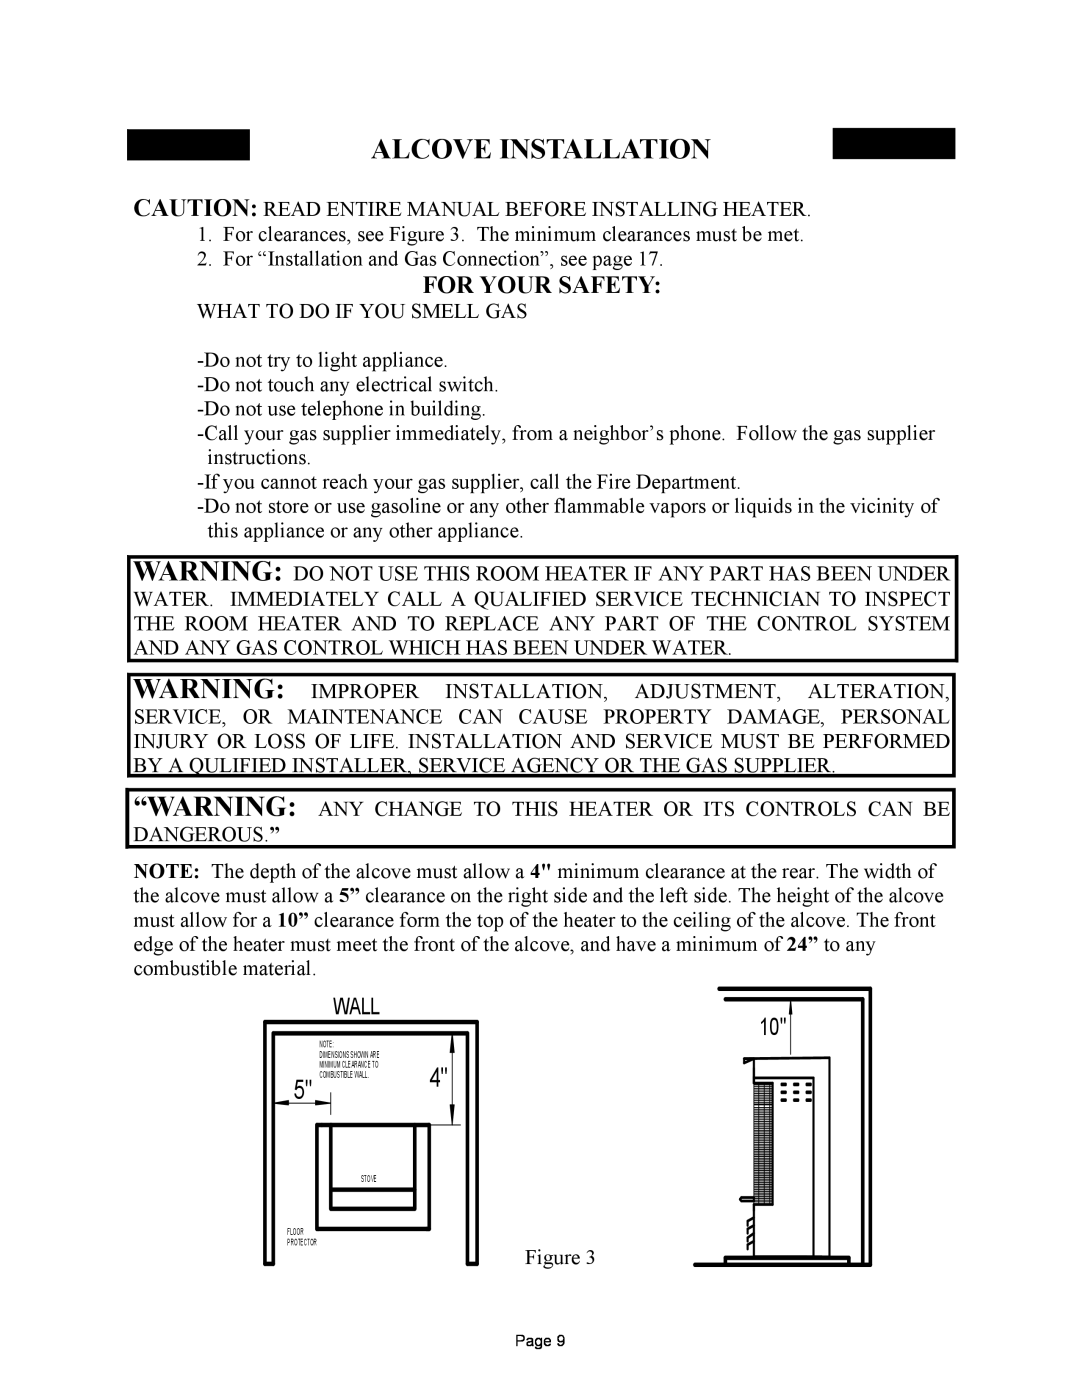 New Buck Corporation 32 manual Alcove Installation, For Your Safety, Wall 